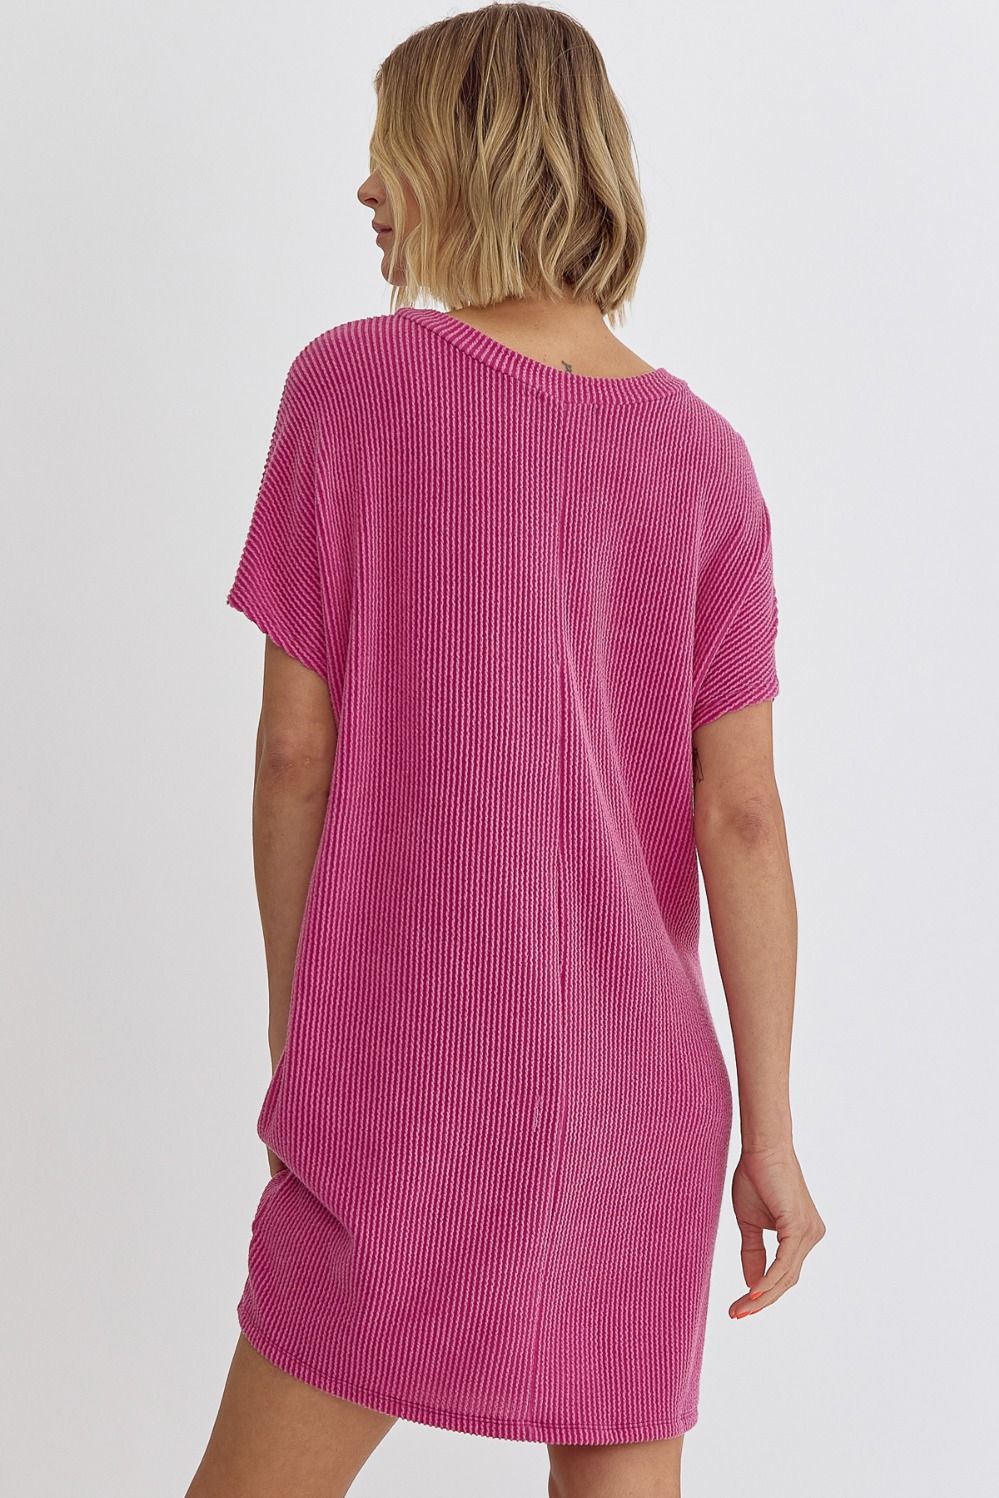 Kick Back Ribbed Dress in Orchid